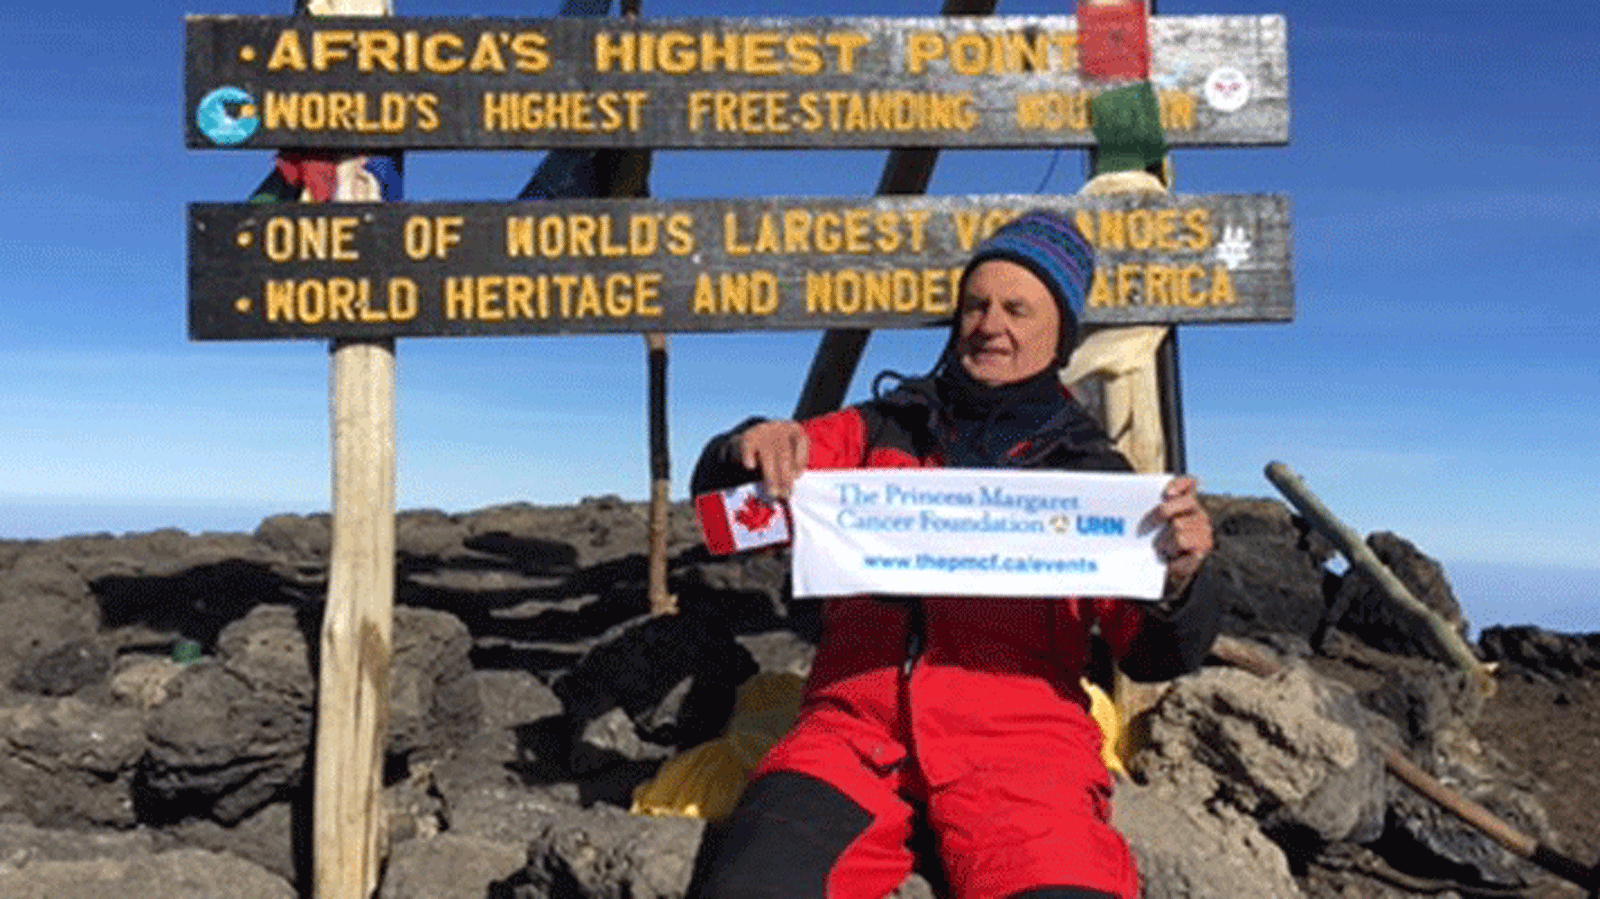 80-year-old Julius Grodski climbs the tallest mountain in Africa in support of The Princess Margaret